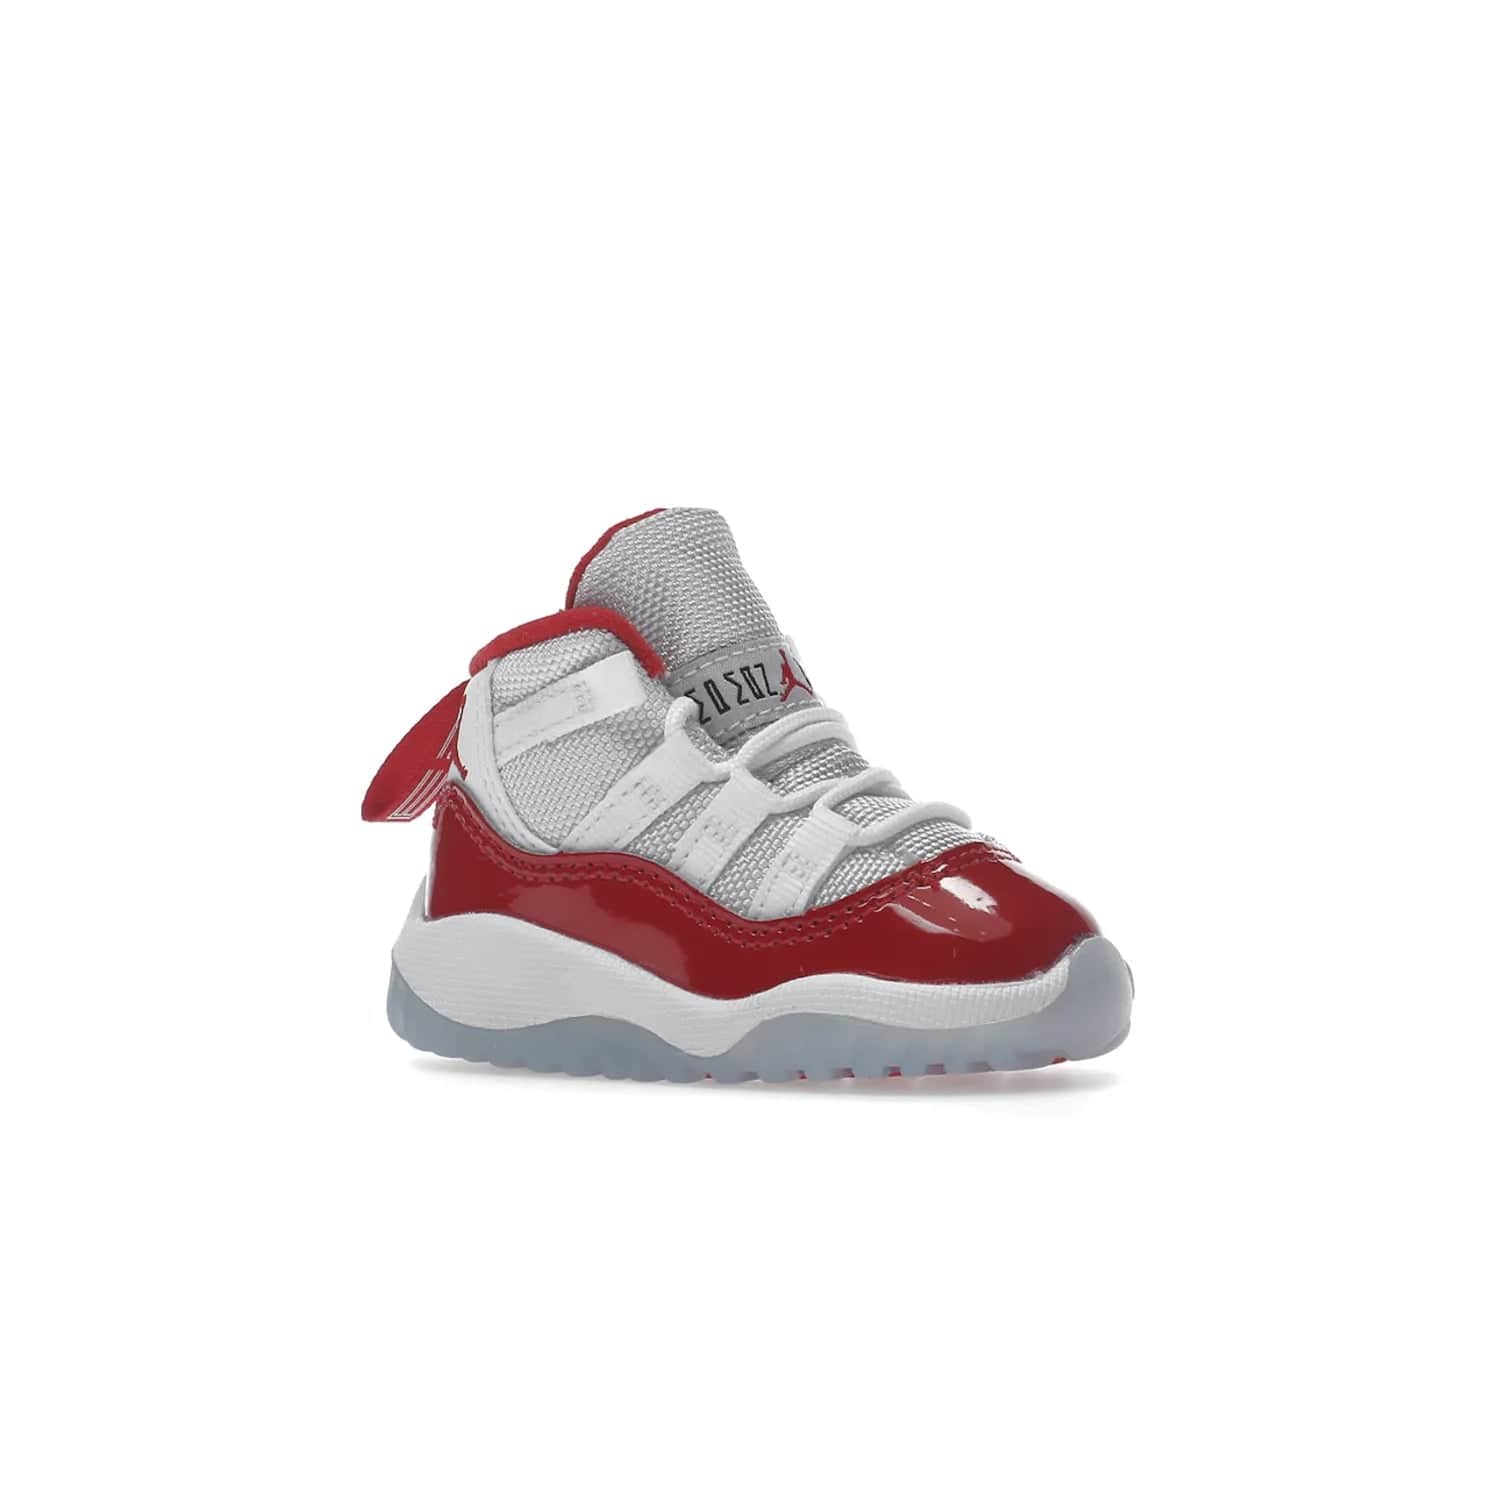 Jordan 11 Retro Cherry (2022) (TD) - Image 4 - Only at www.BallersClubKickz.com - Timeless classic. Air Jordan 11 Retro Cherry 2022 TD combines mesh, leather & suede for a unique look. White upper with varsity red suede. Jumpman logo on collar & tongue. Available Dec 10th, priced at $80.